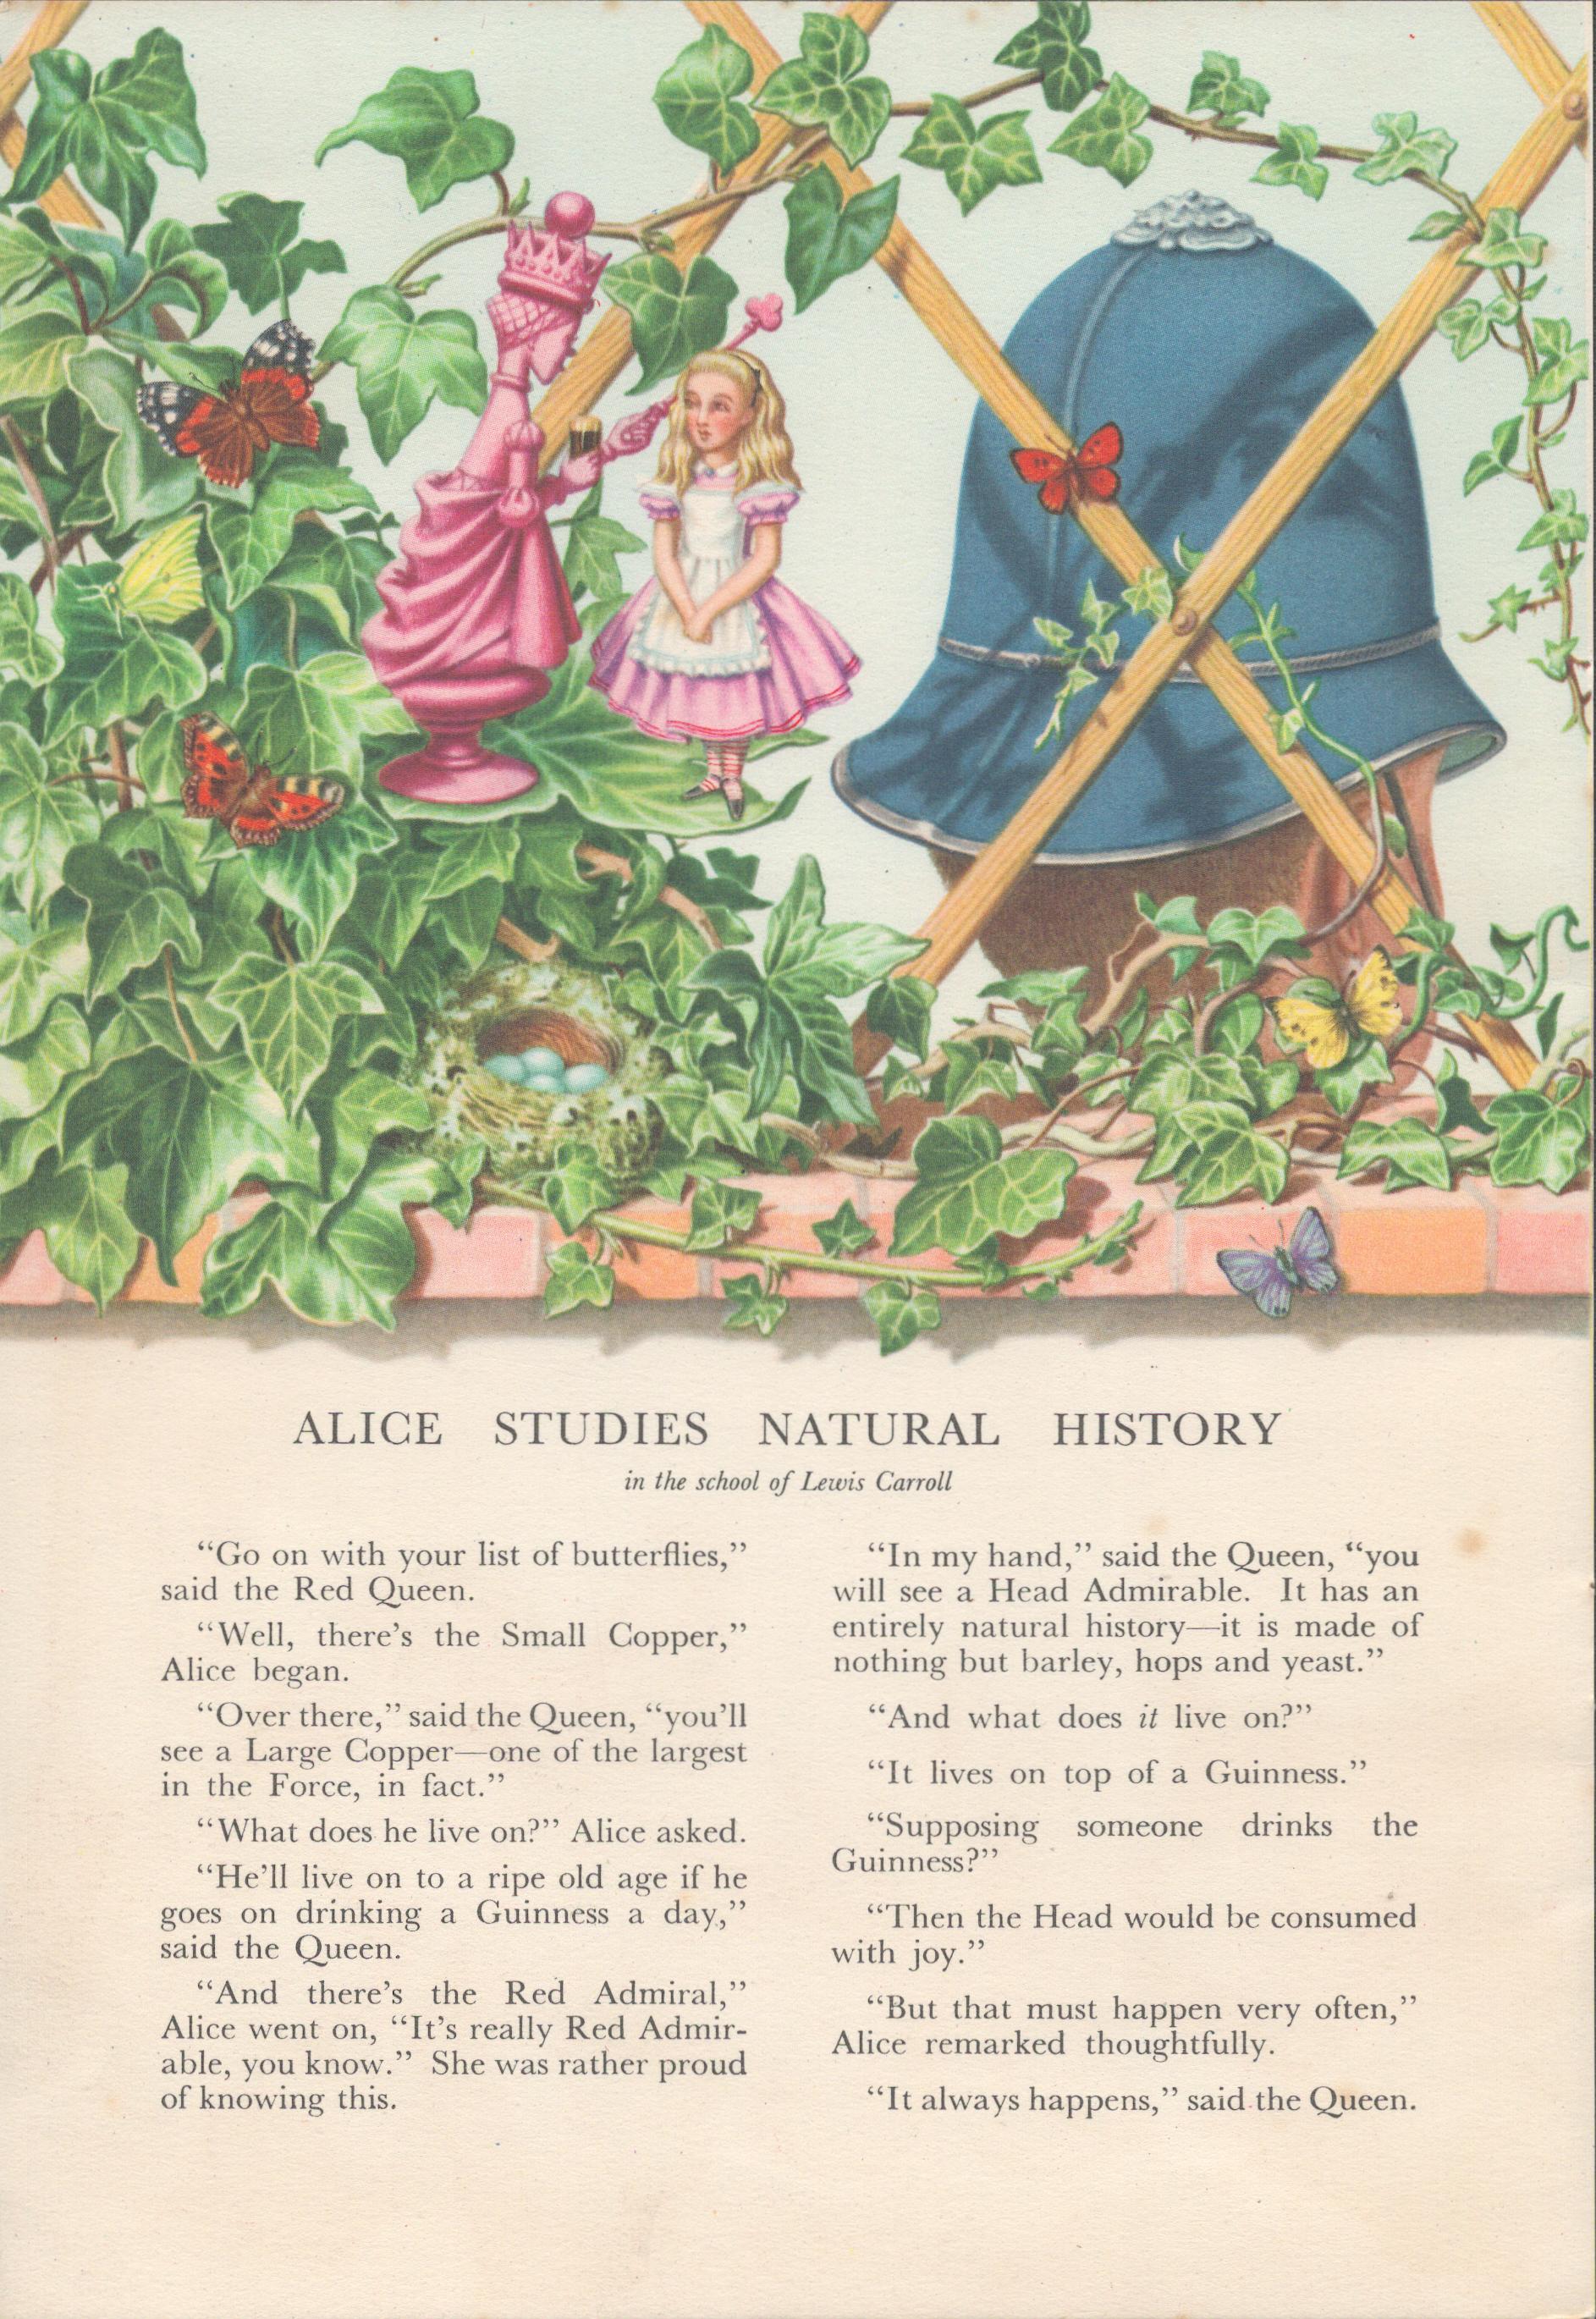 71 Years Old Alice In Wonderland Guinness Print ""Natural Science"".